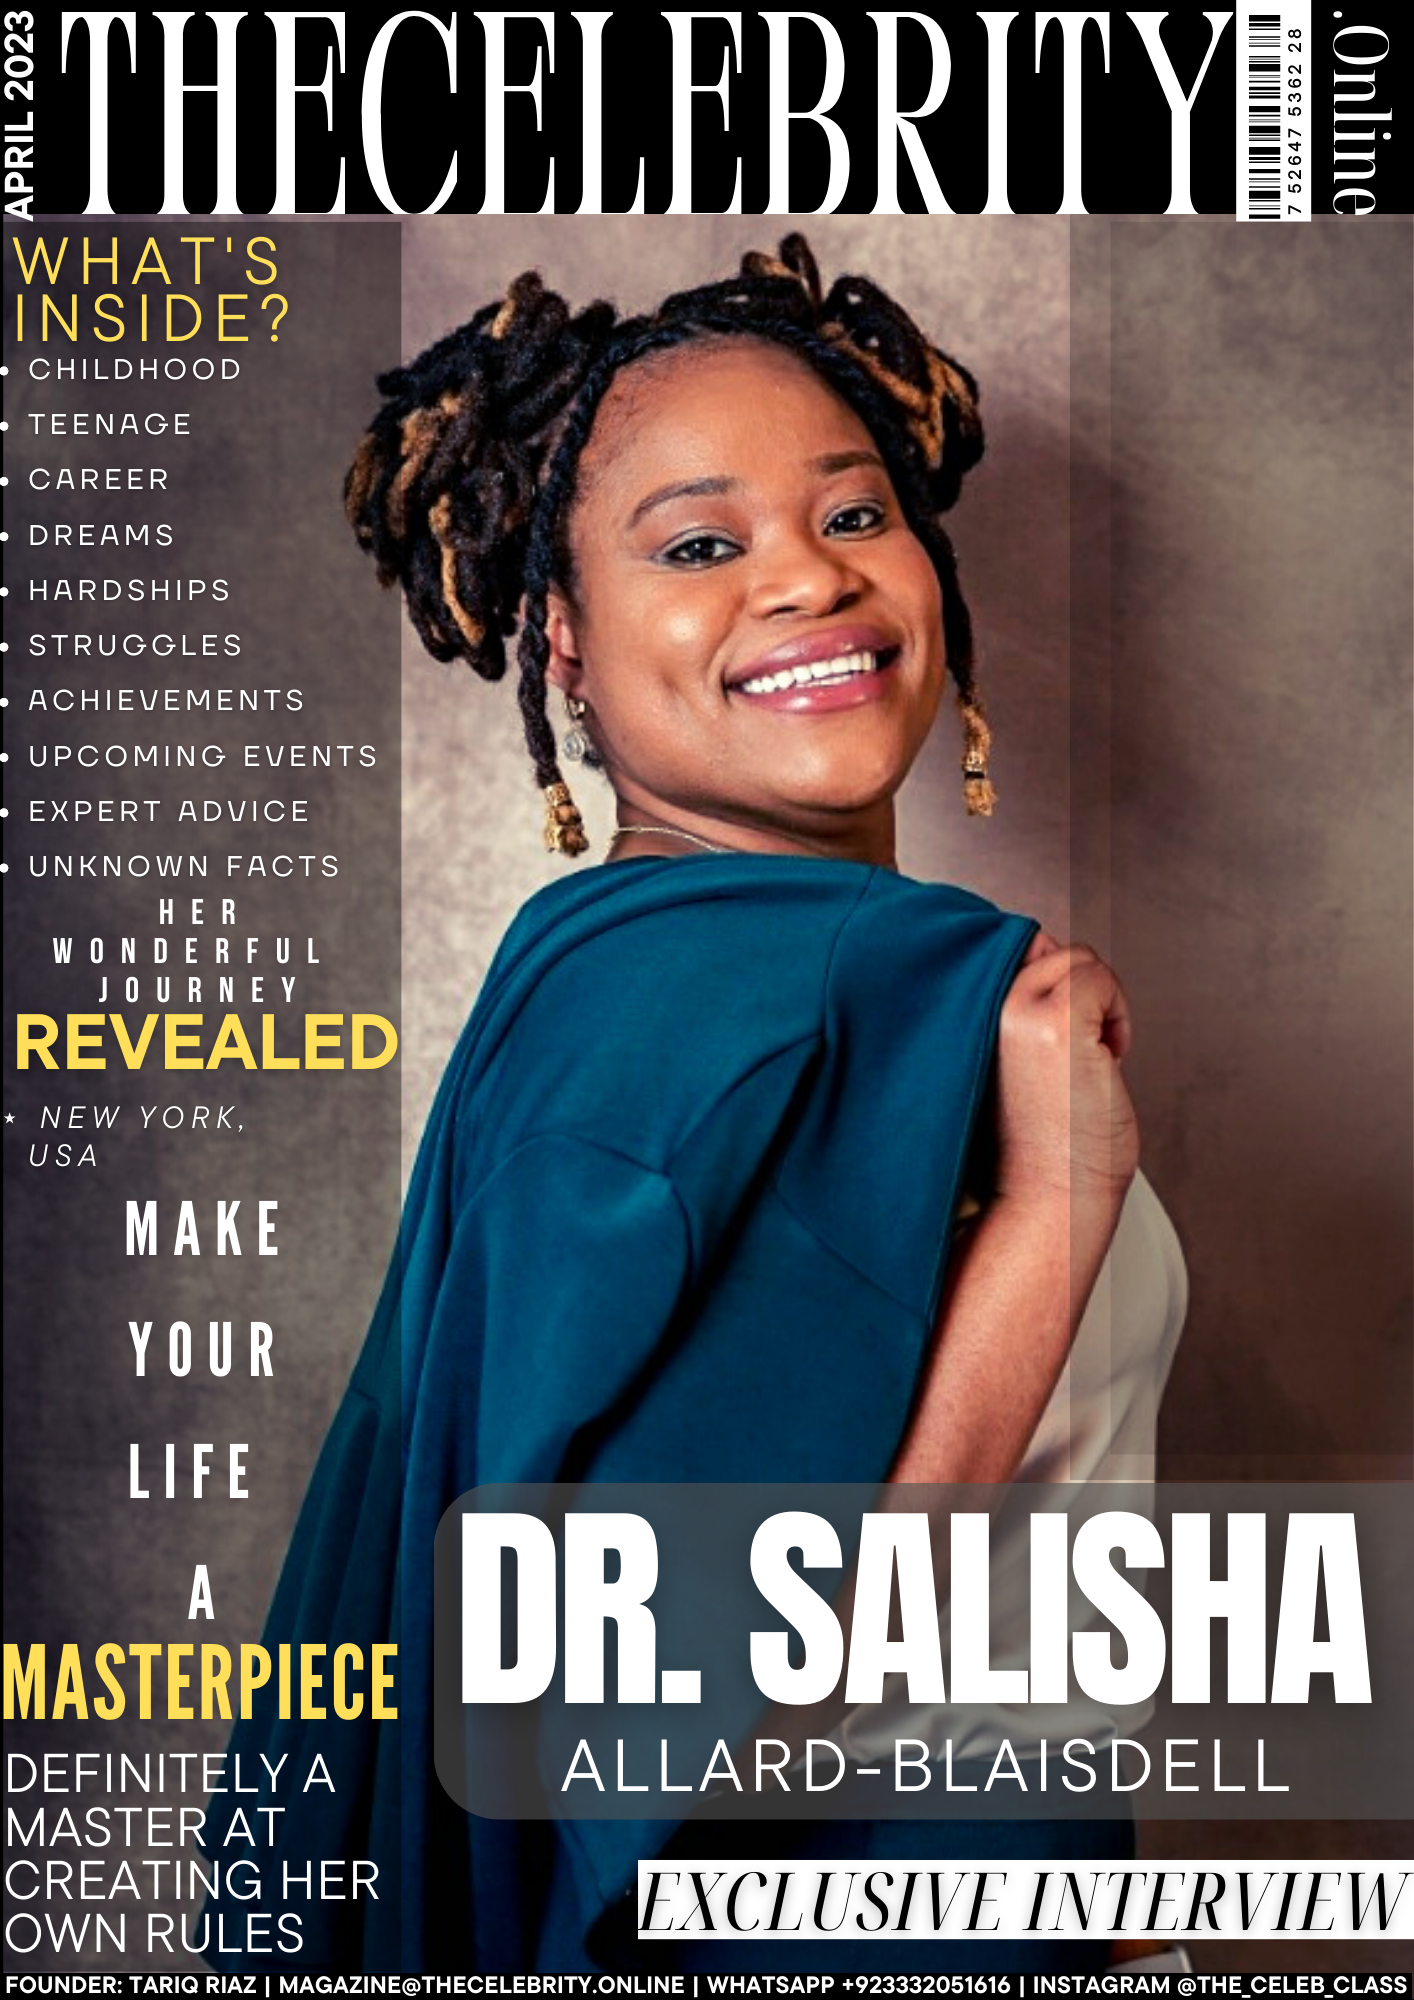 Dr. Salisha Allard-Blaisdell Exclusive Interview – ‘With every obstacle, there is an opportunity’